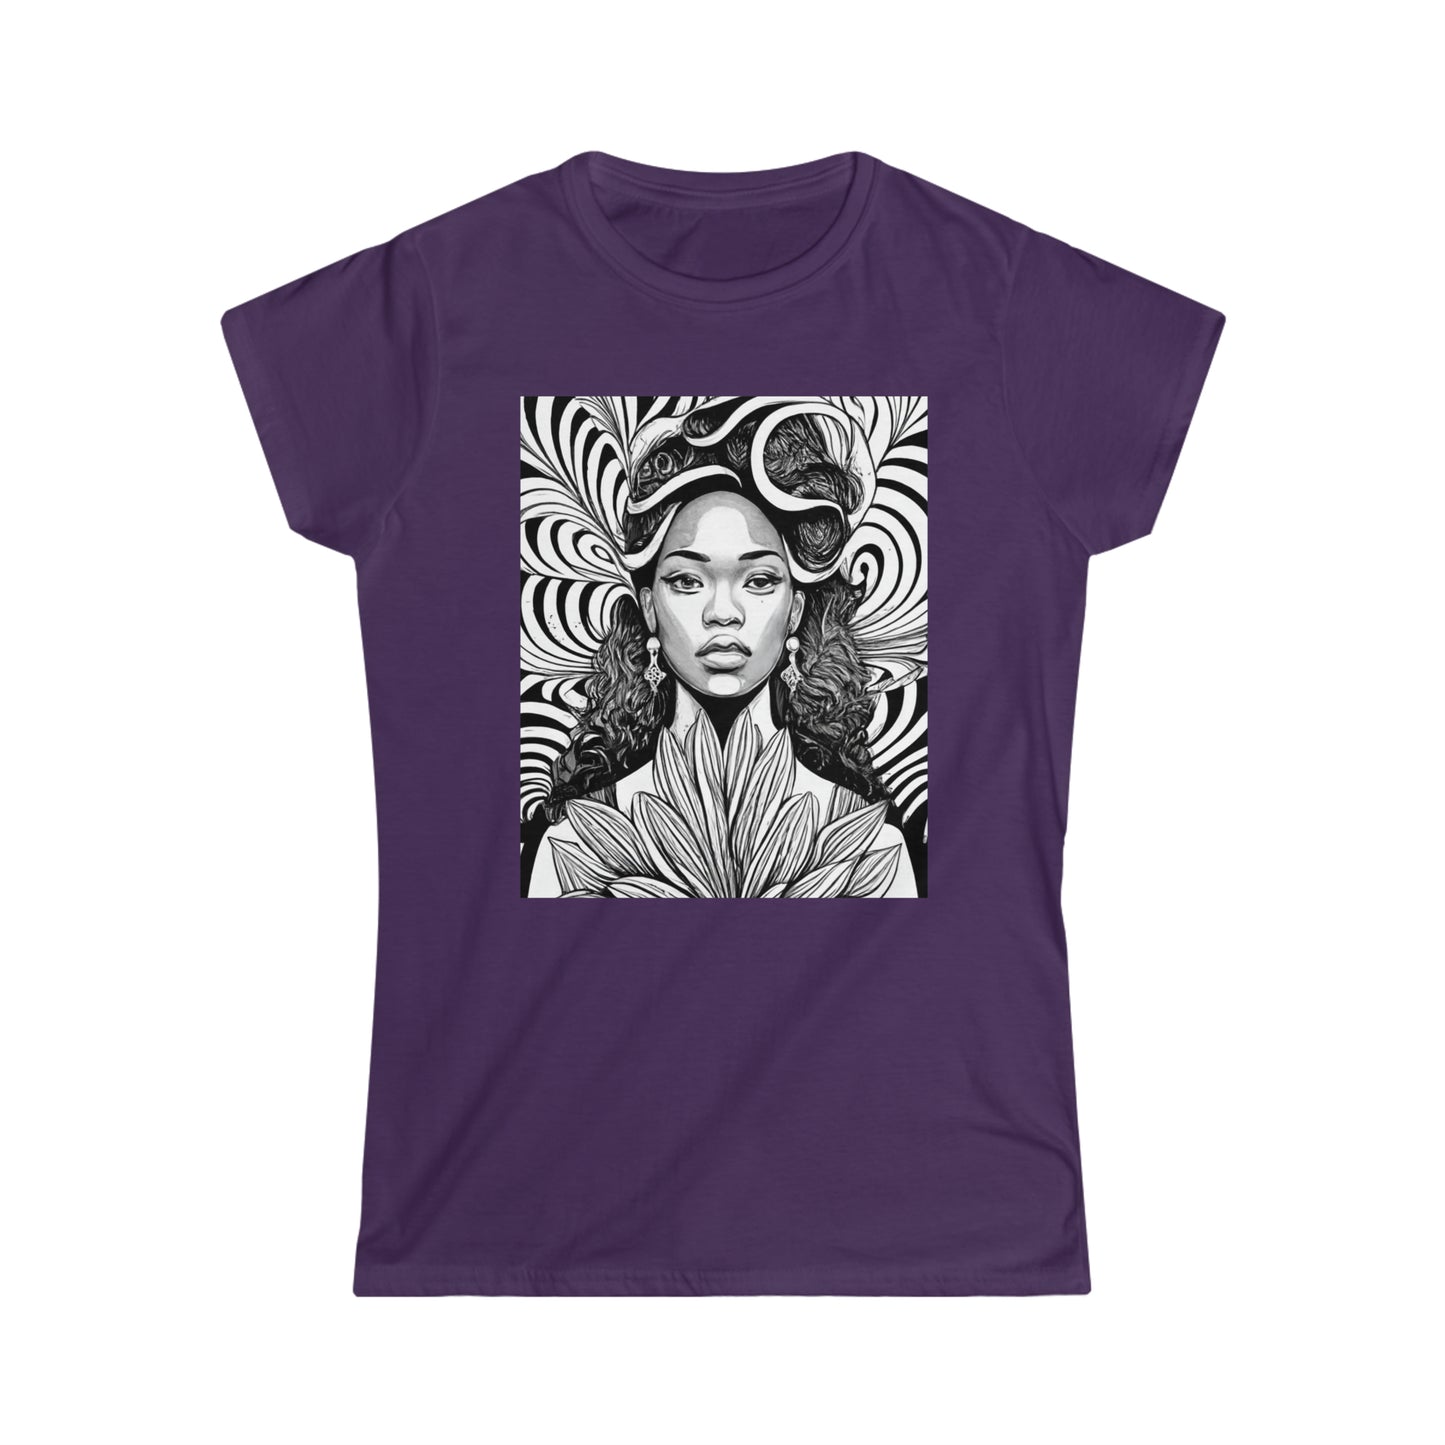 Our Queens Women's Softstyle Tee